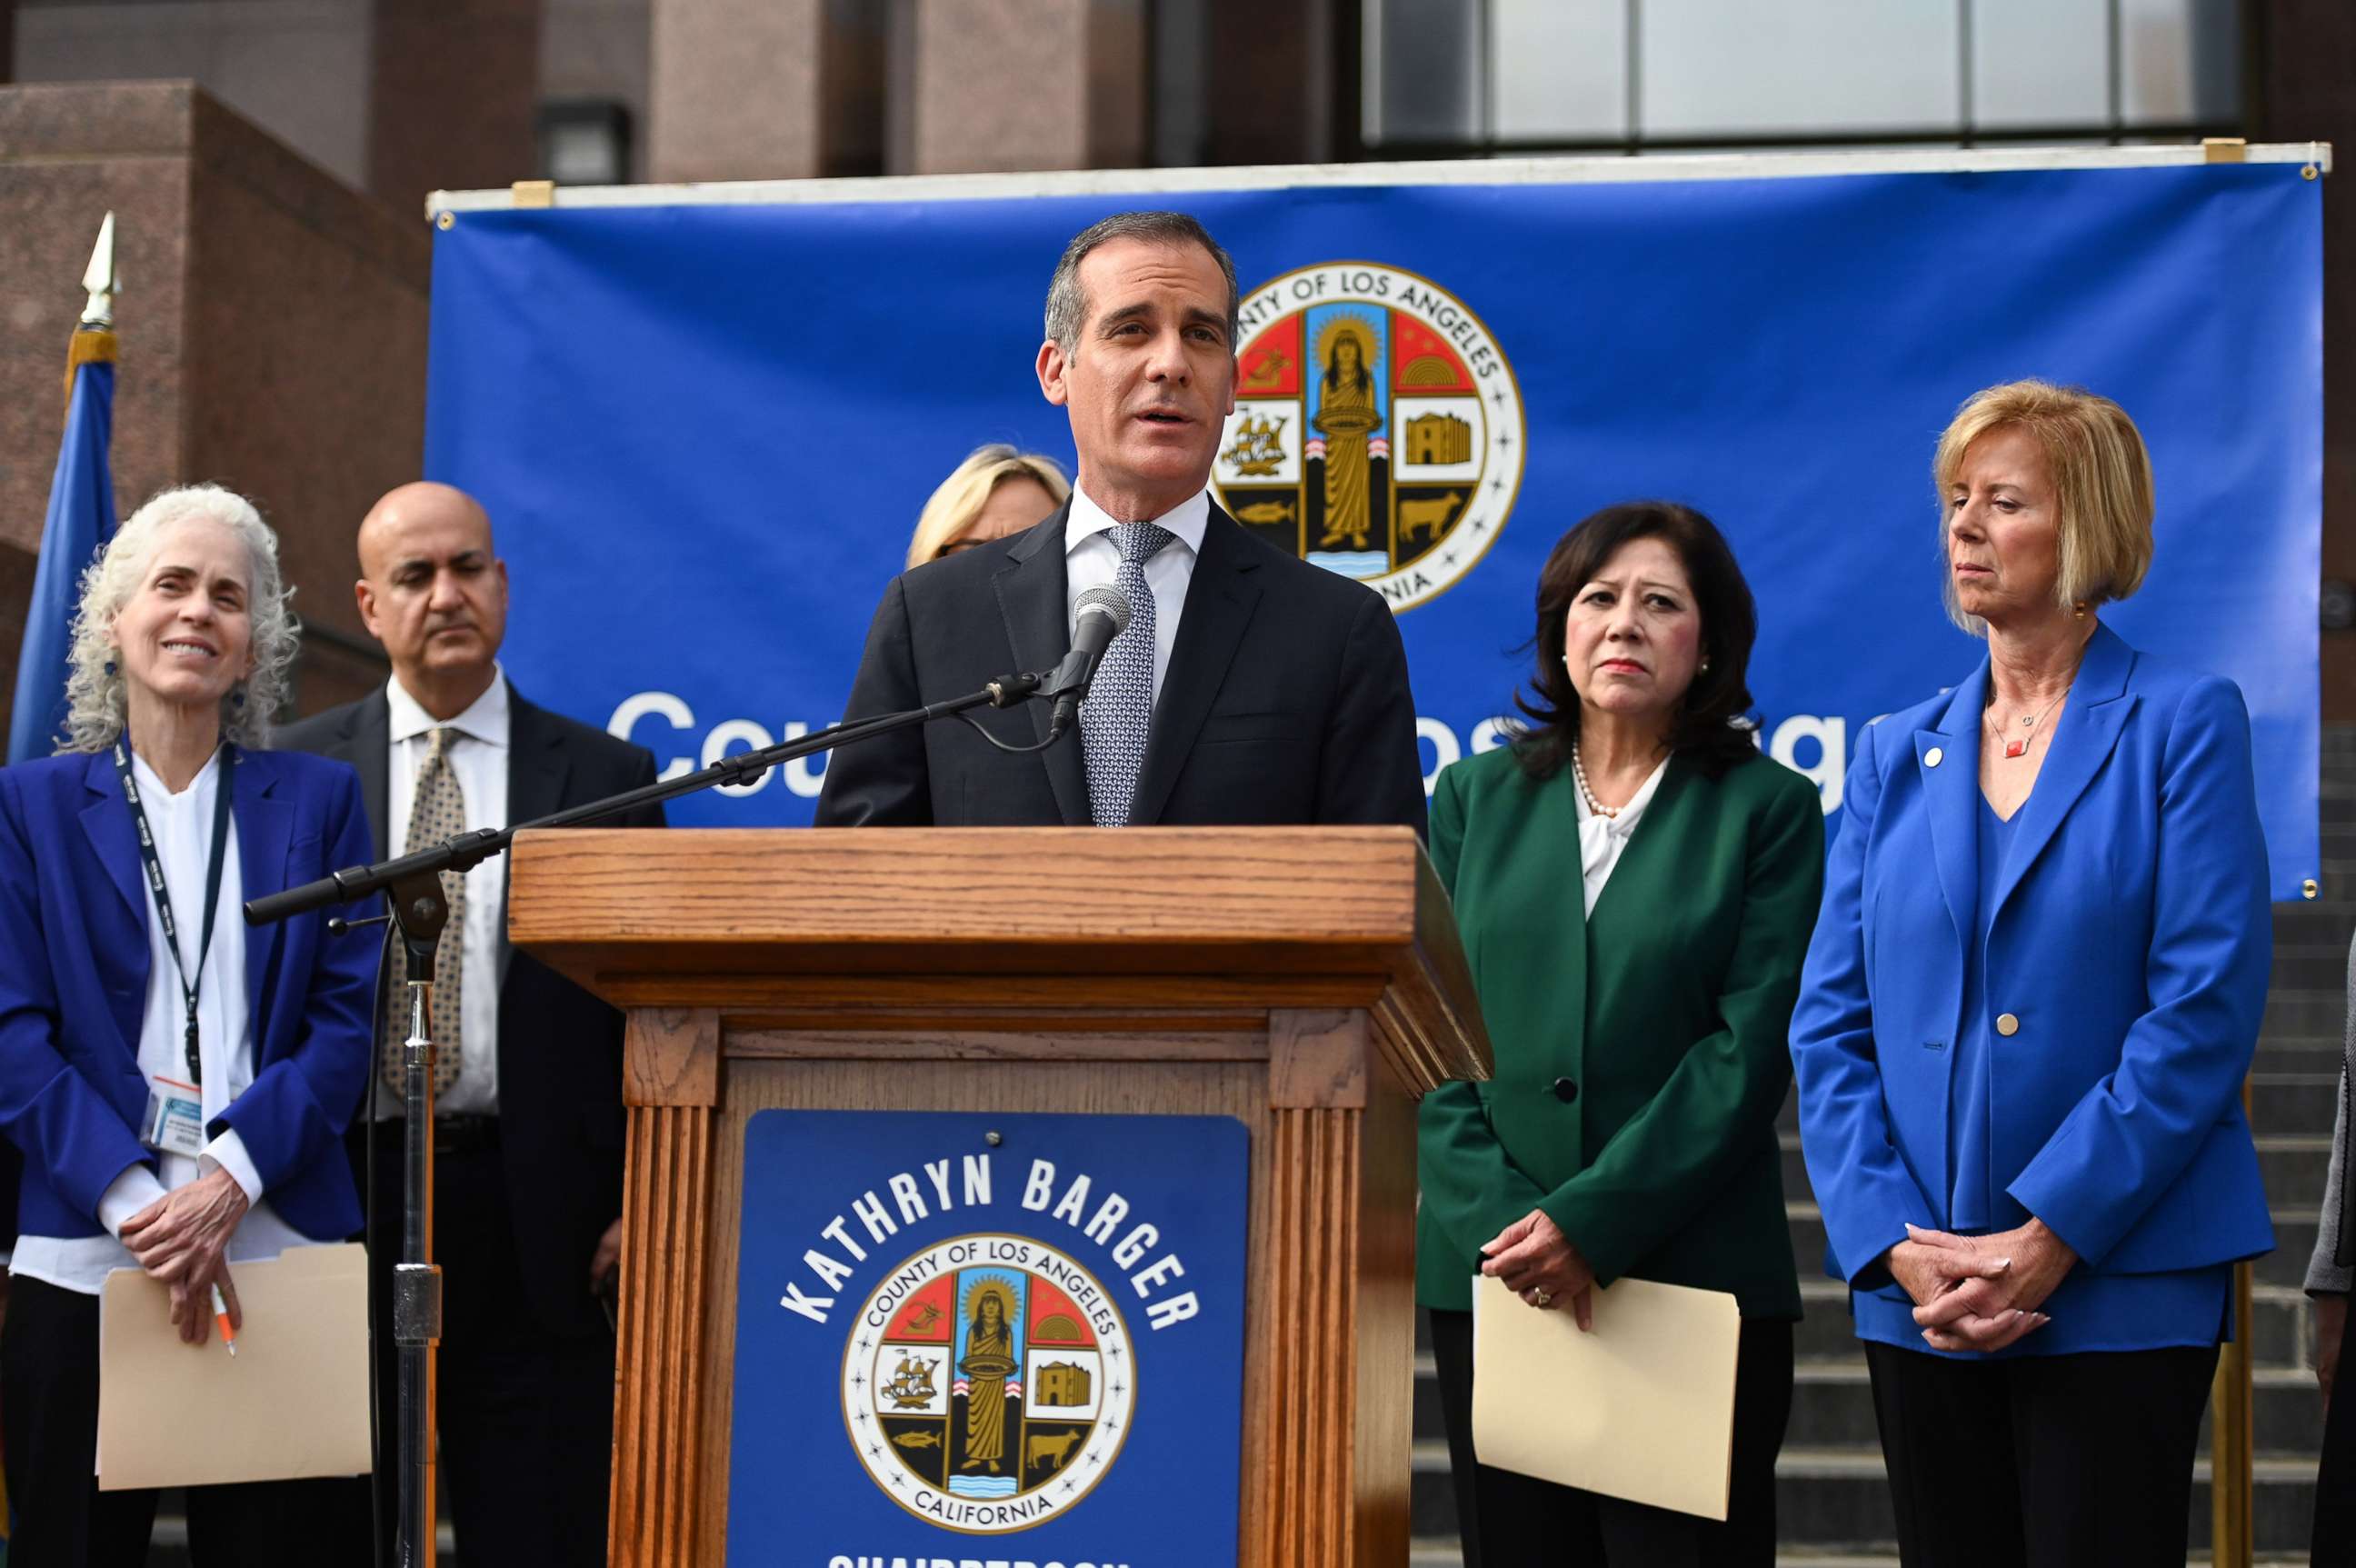 PHOTO: Los Angeles Mayor Eric Garcetti speaks during a Los Angeles County Health Department press conference on the novel coronavirus (COVID-19), March 4, 2020, after declaring a state of emergency, in Los Angeles.